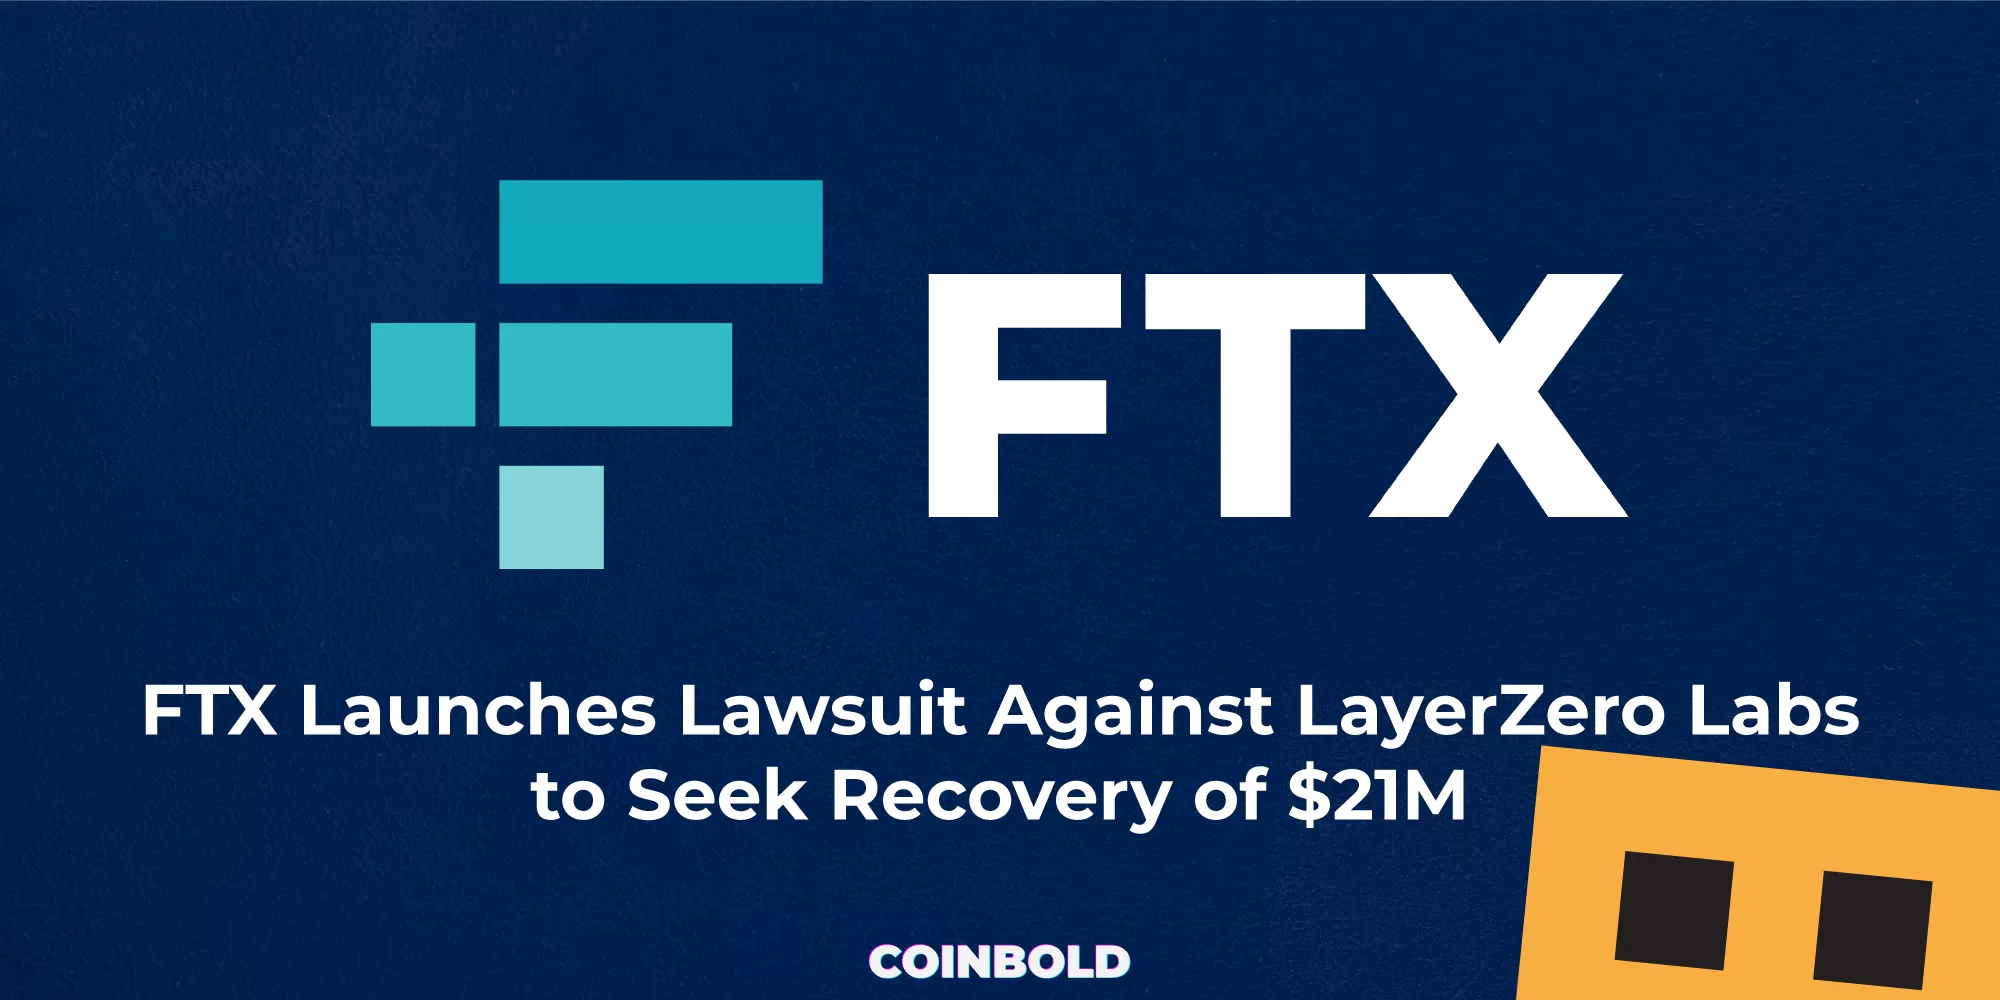 FTX Launches Lawsuit Against LayerZero Labs to Seek Recovery of $21M